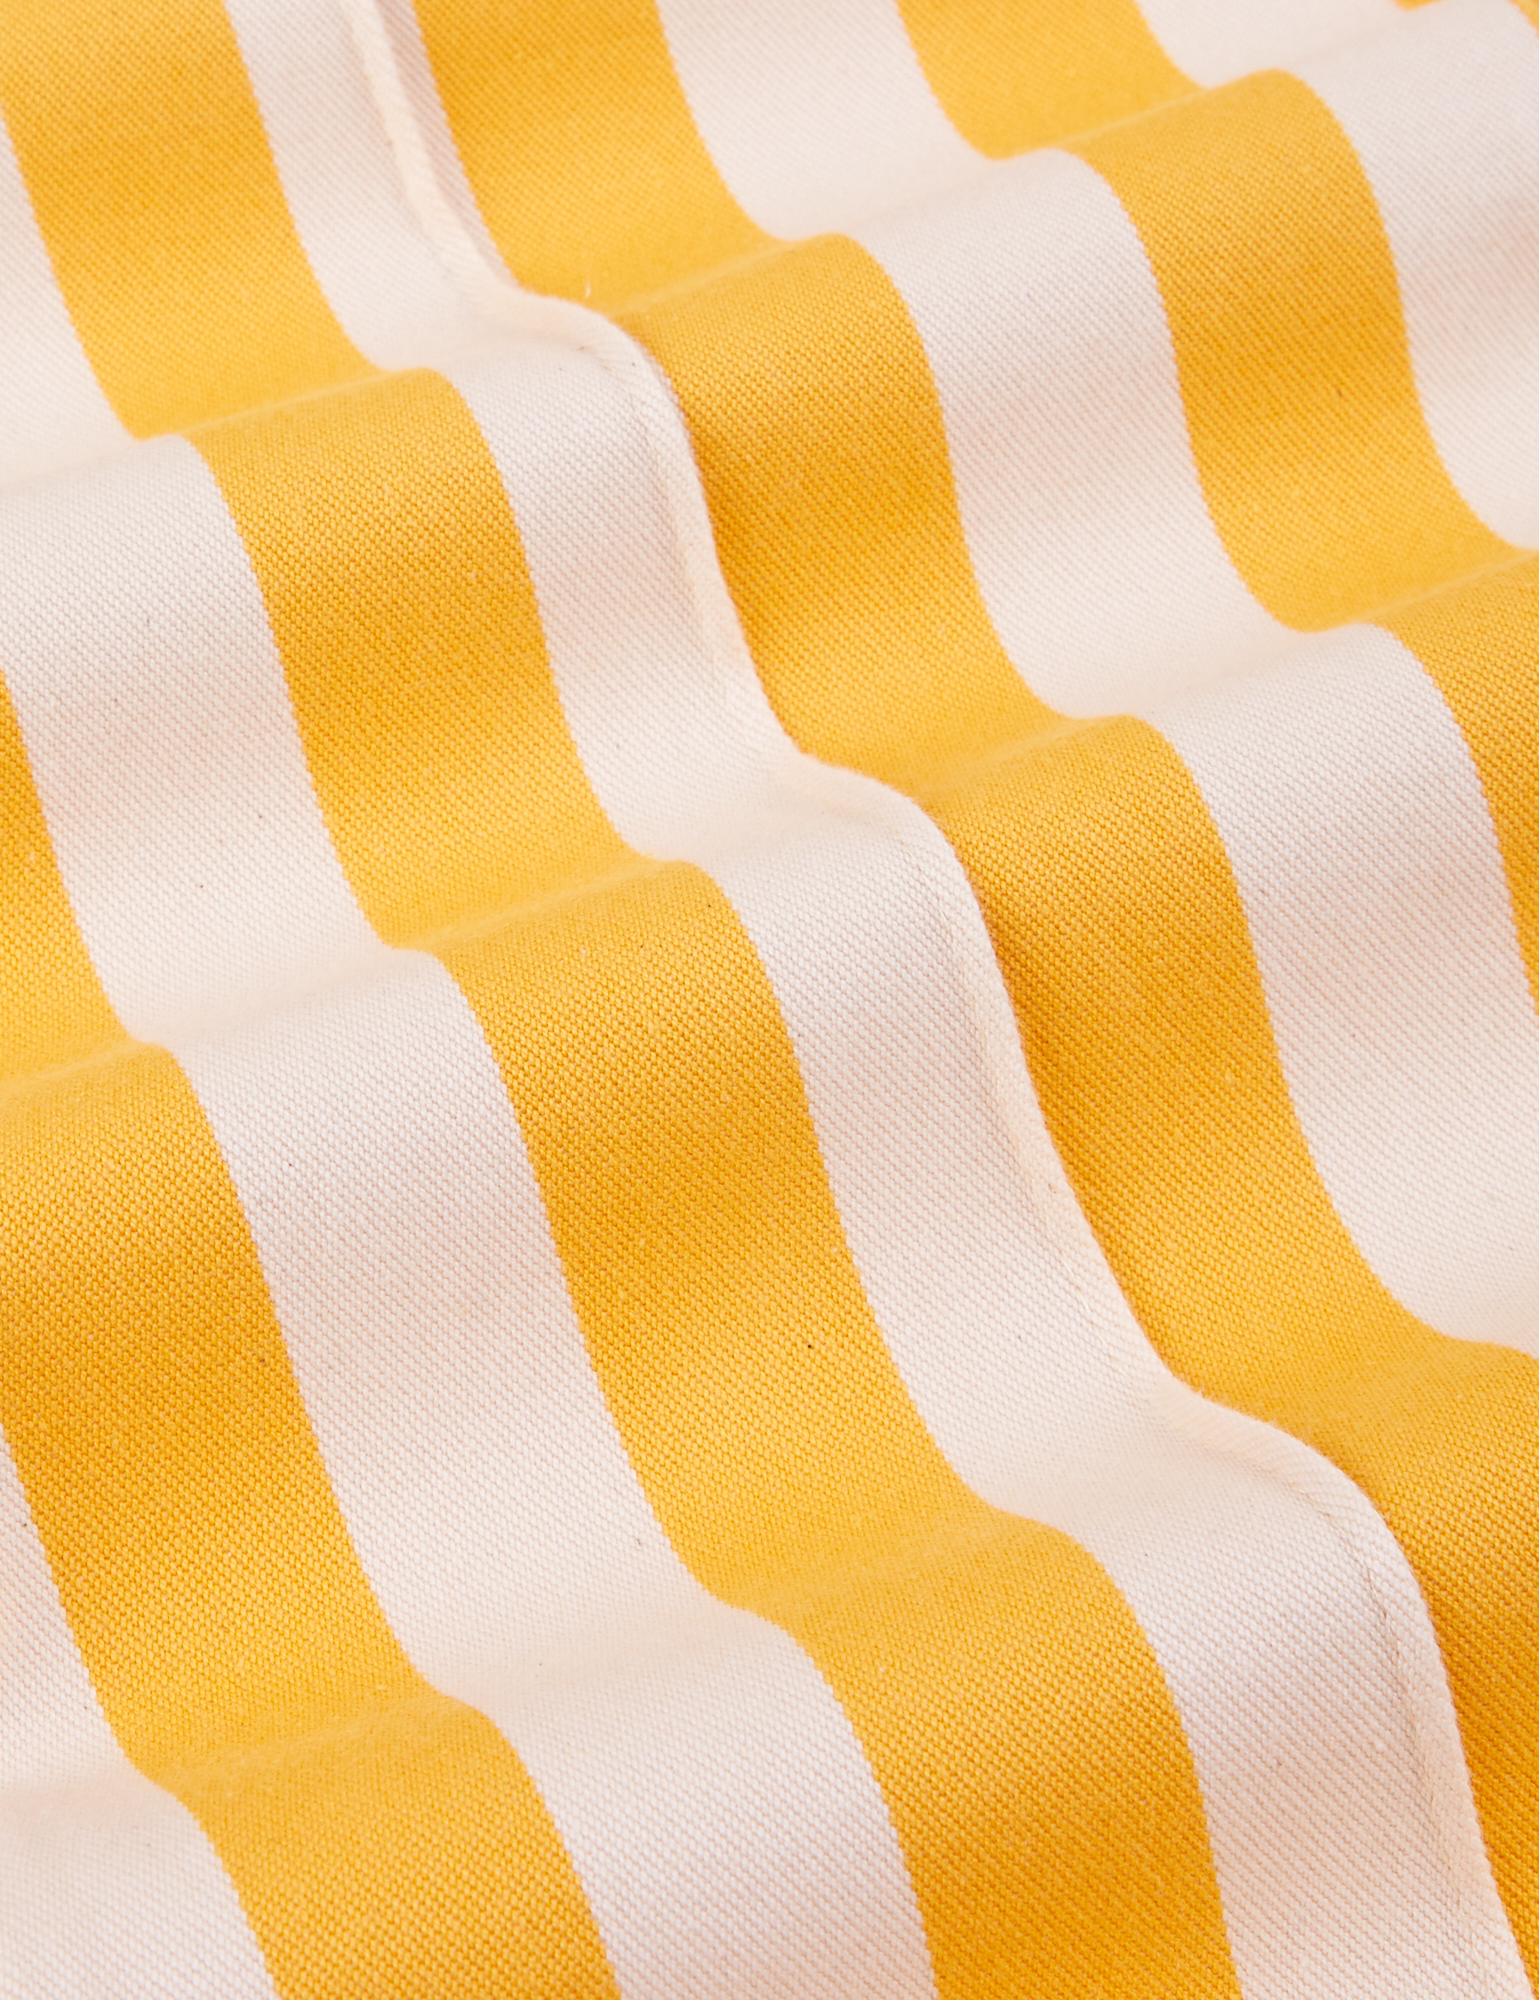 Western Pants in Ketchup/Mustard Stripes fabric close up - yellow and white close up